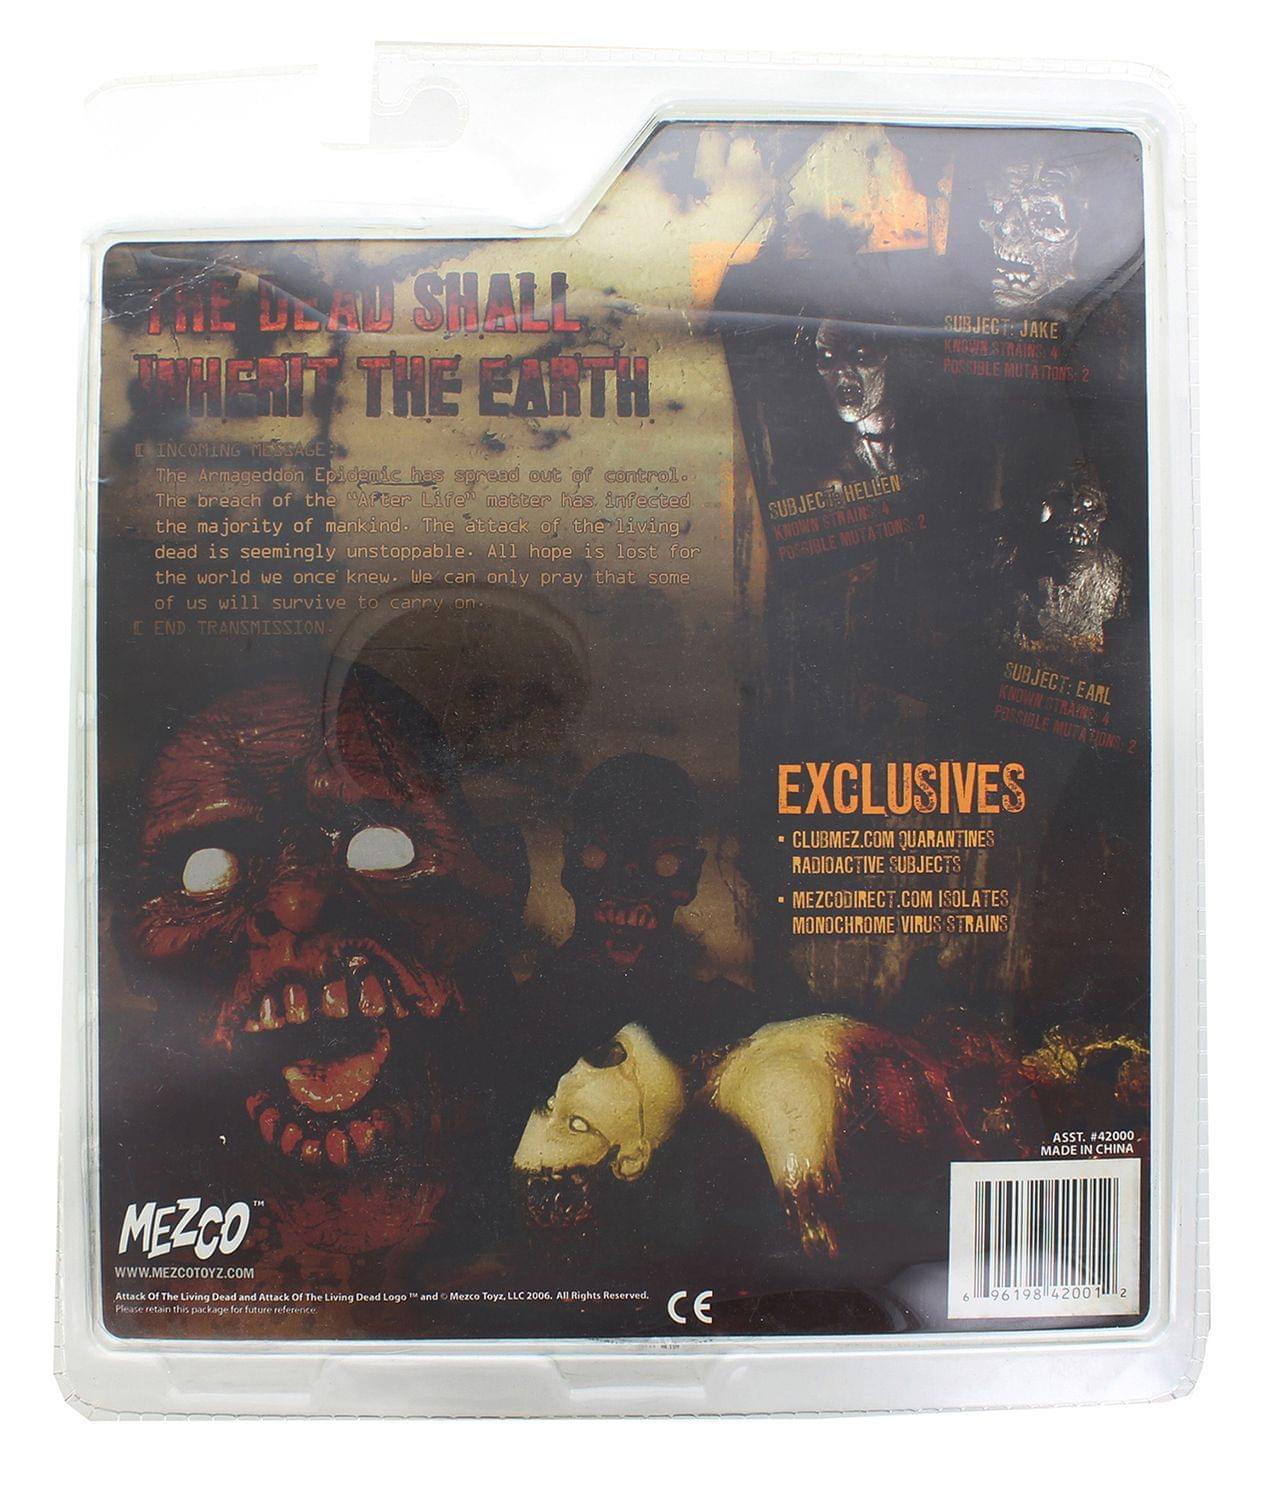 Attack Of The Living Dead Zombies Series 1 Earl Color Strain - 2 Eyes